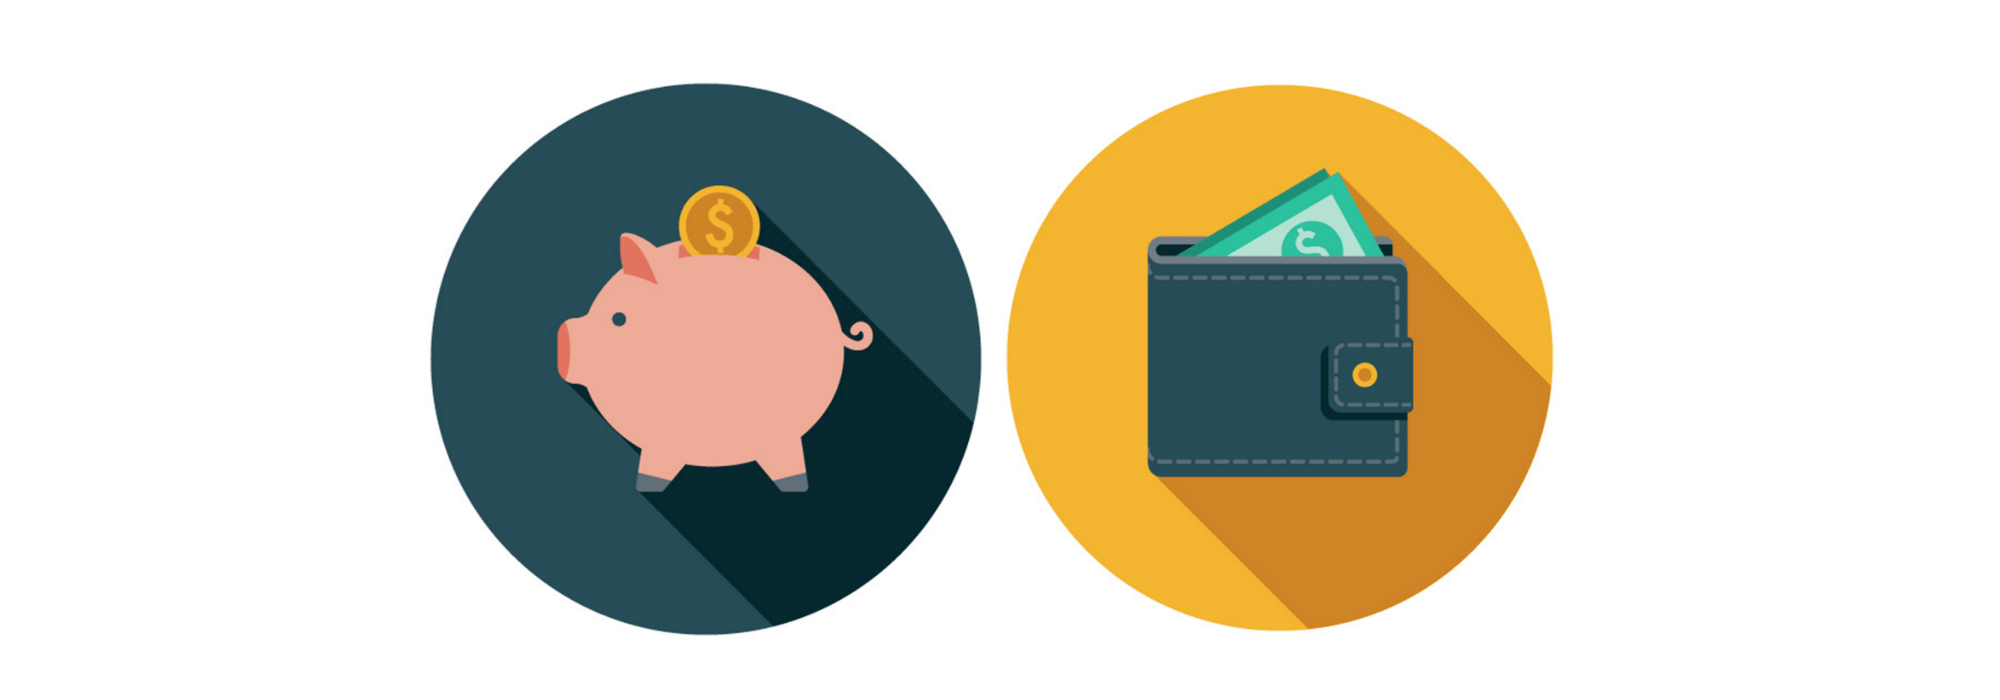 Icon of Piggy Bank and Wallet